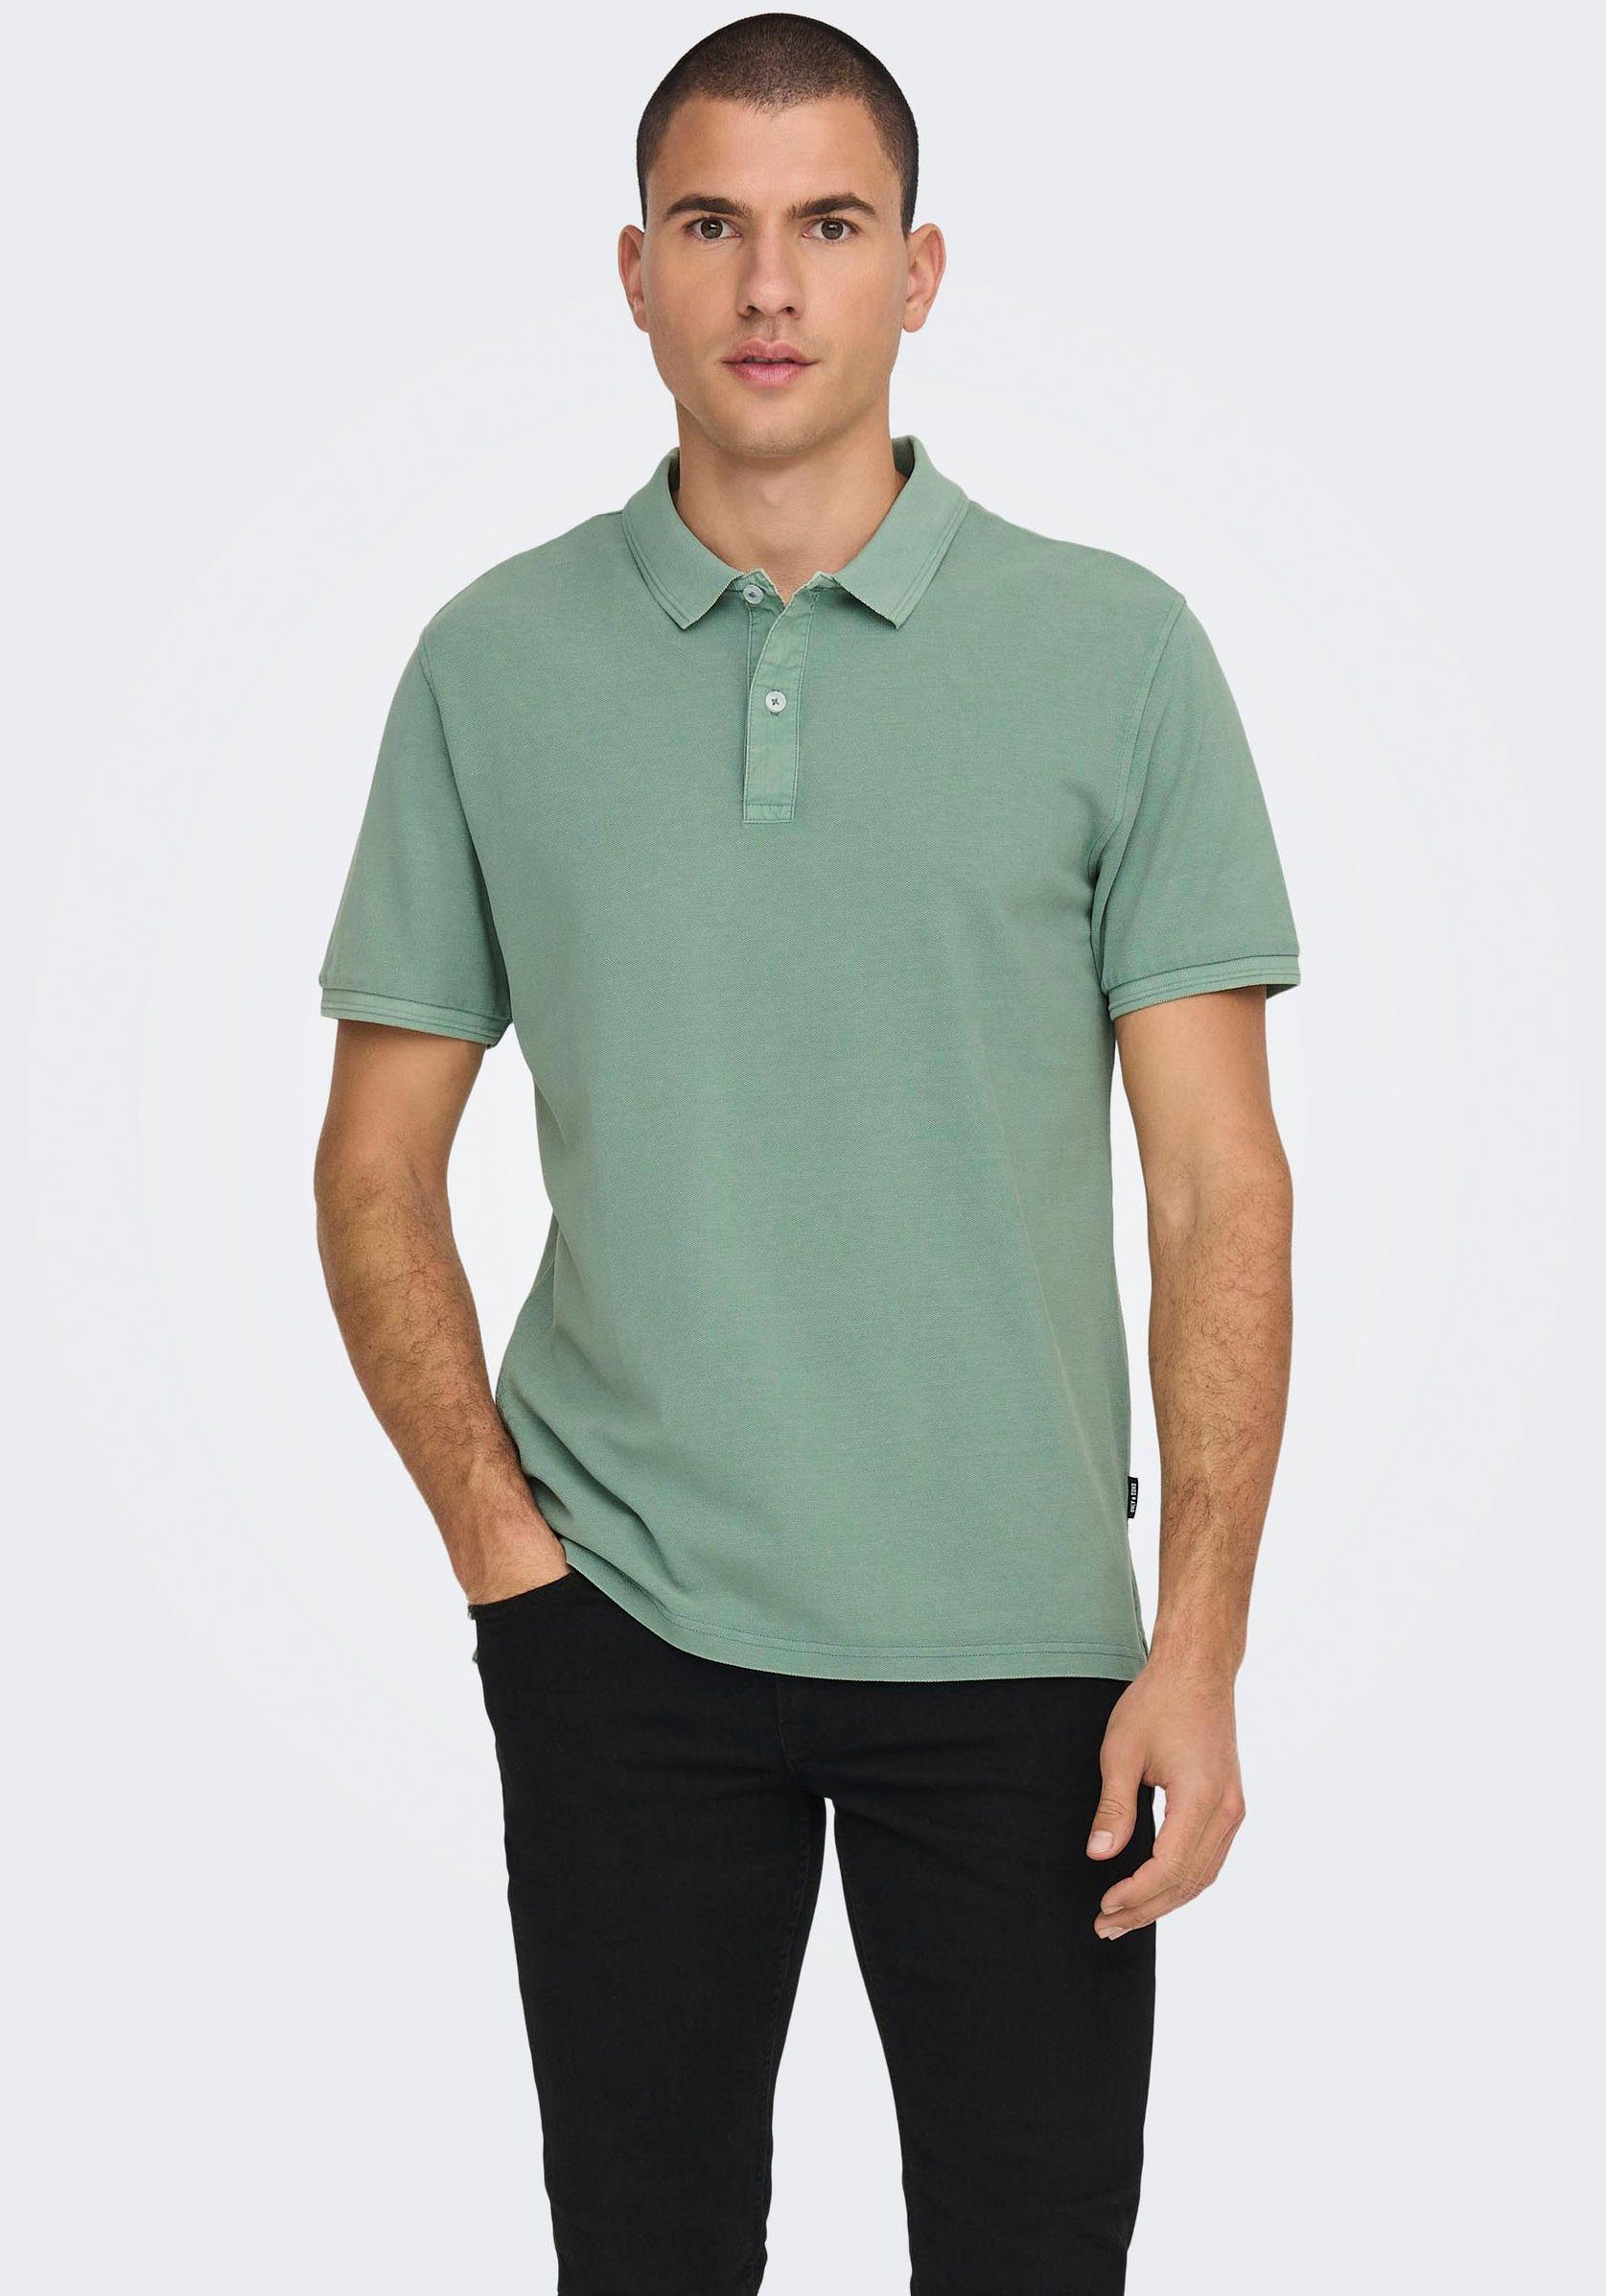 SONS Polo chinois ONLY TRAVIS & green Poloshirt